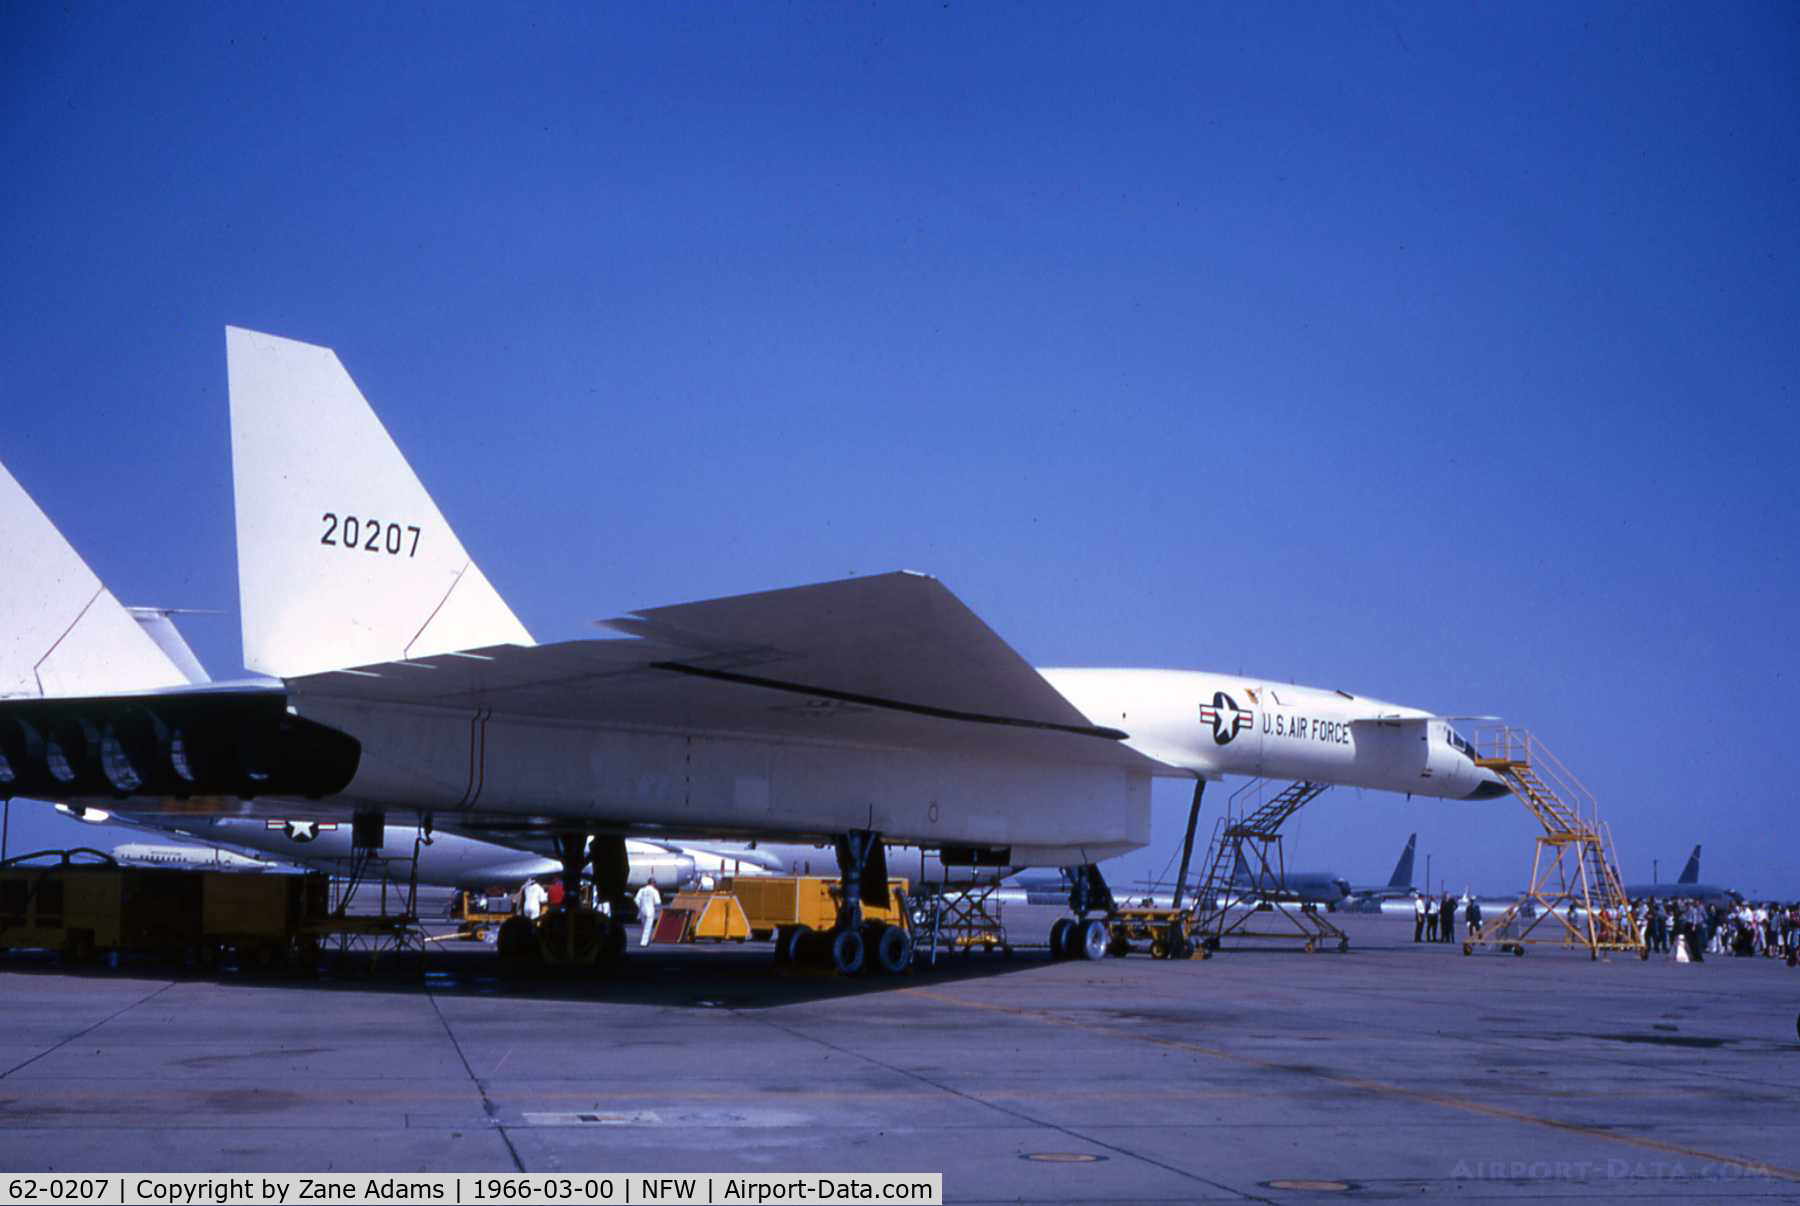 62-0207, 1962 North American XB-70A Valkyrie C/N 278-2, This Aircraft collided with F-104N (NASA 813) June 8, 1966 while filming publicity - Taken at 1966 Air Force Assn Airshow, Carswell AFB - Photo By John Williams - published with permission.